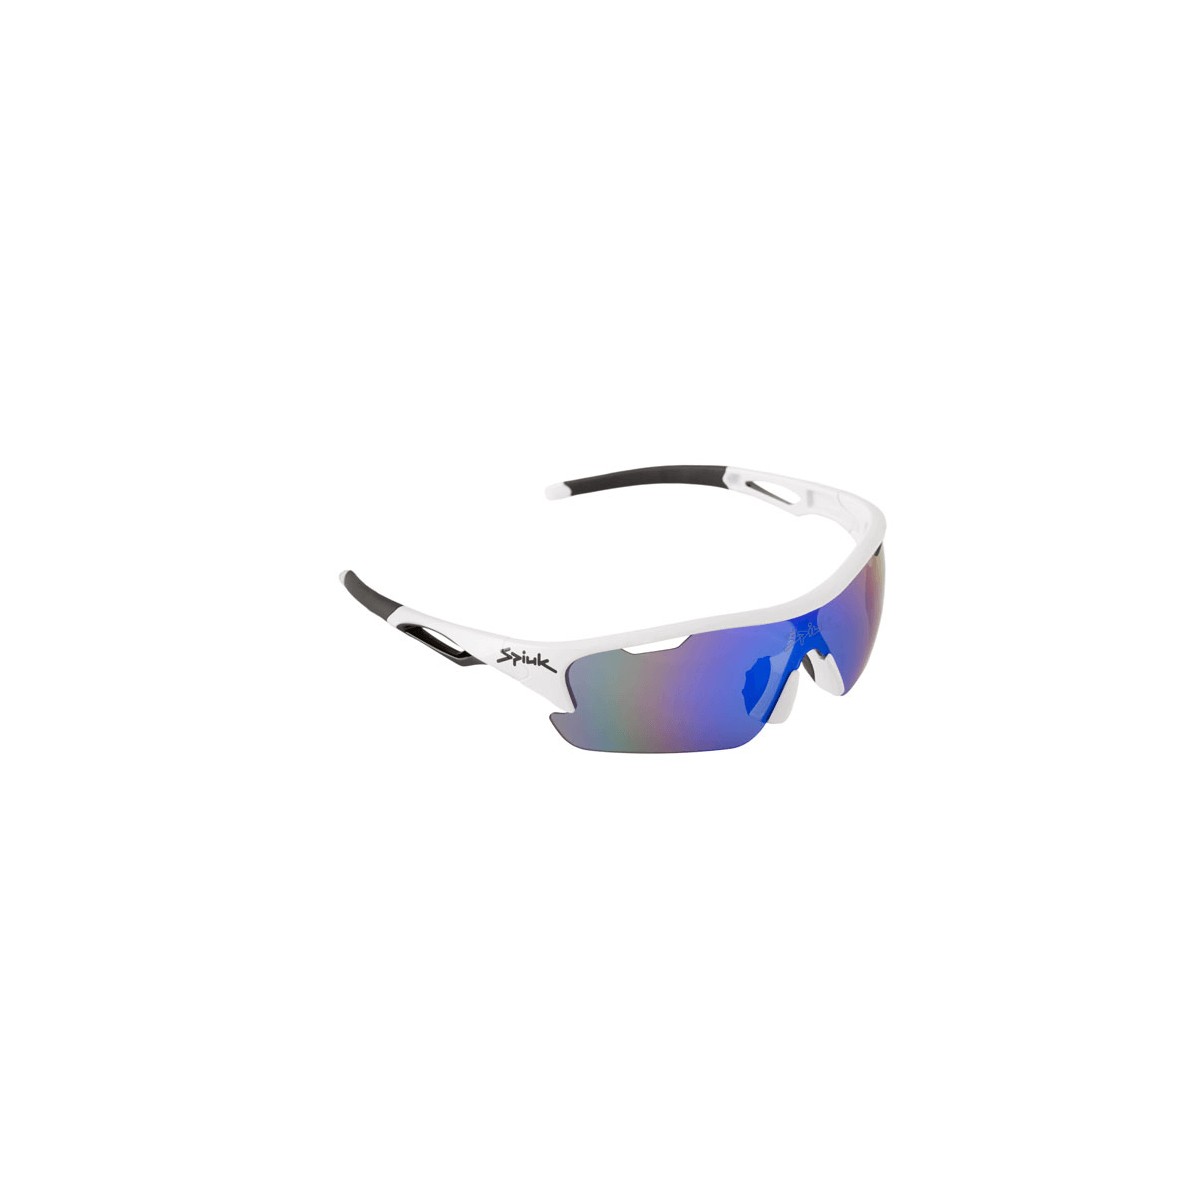 Spiuk Jifter Cycling Glasses White / Black Blue Mirror Lenses